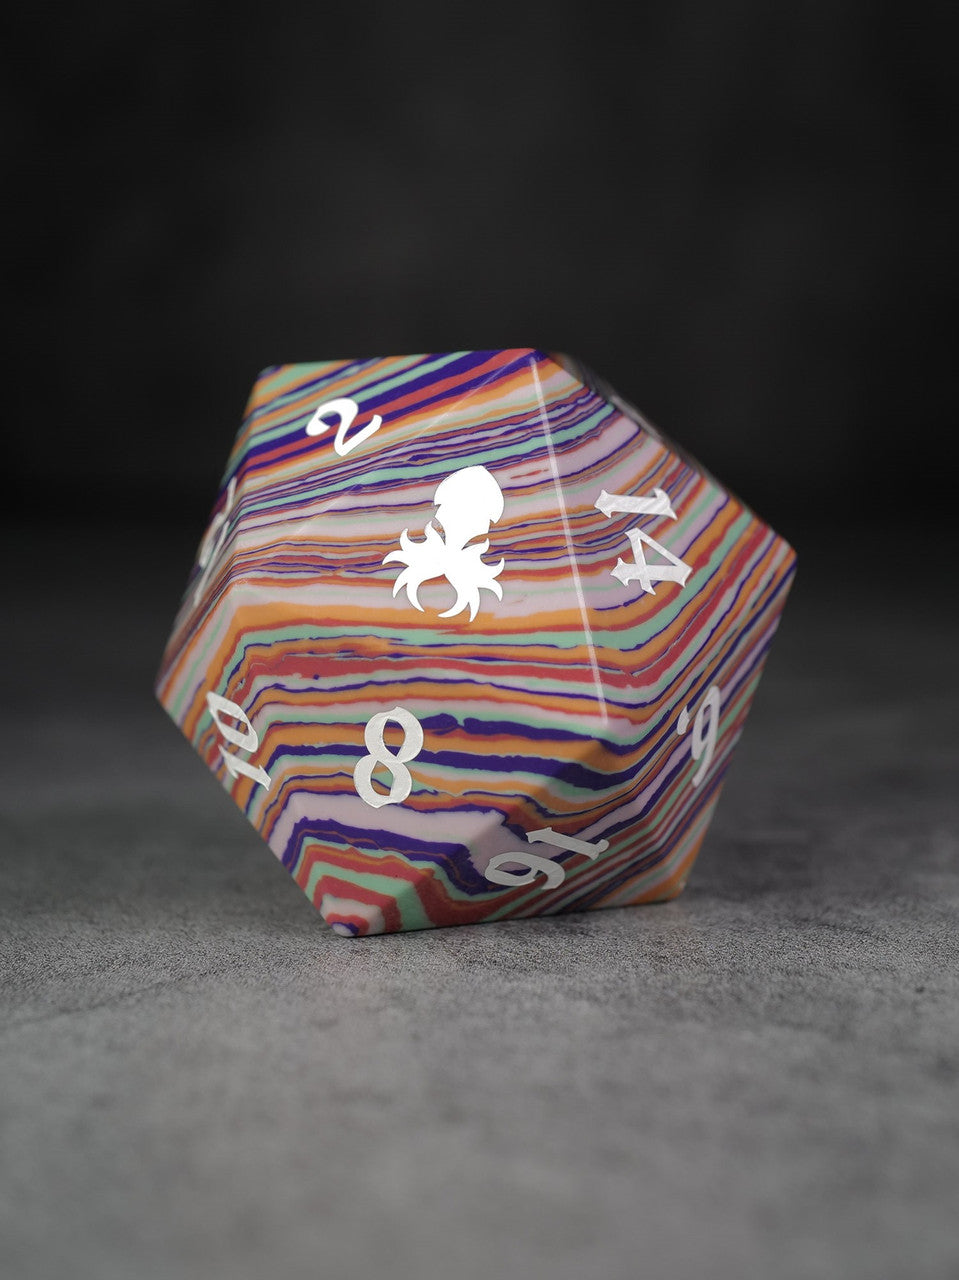 40mm Blue Orange Yellow Layers Semi-Precious Single D20 with White Ink